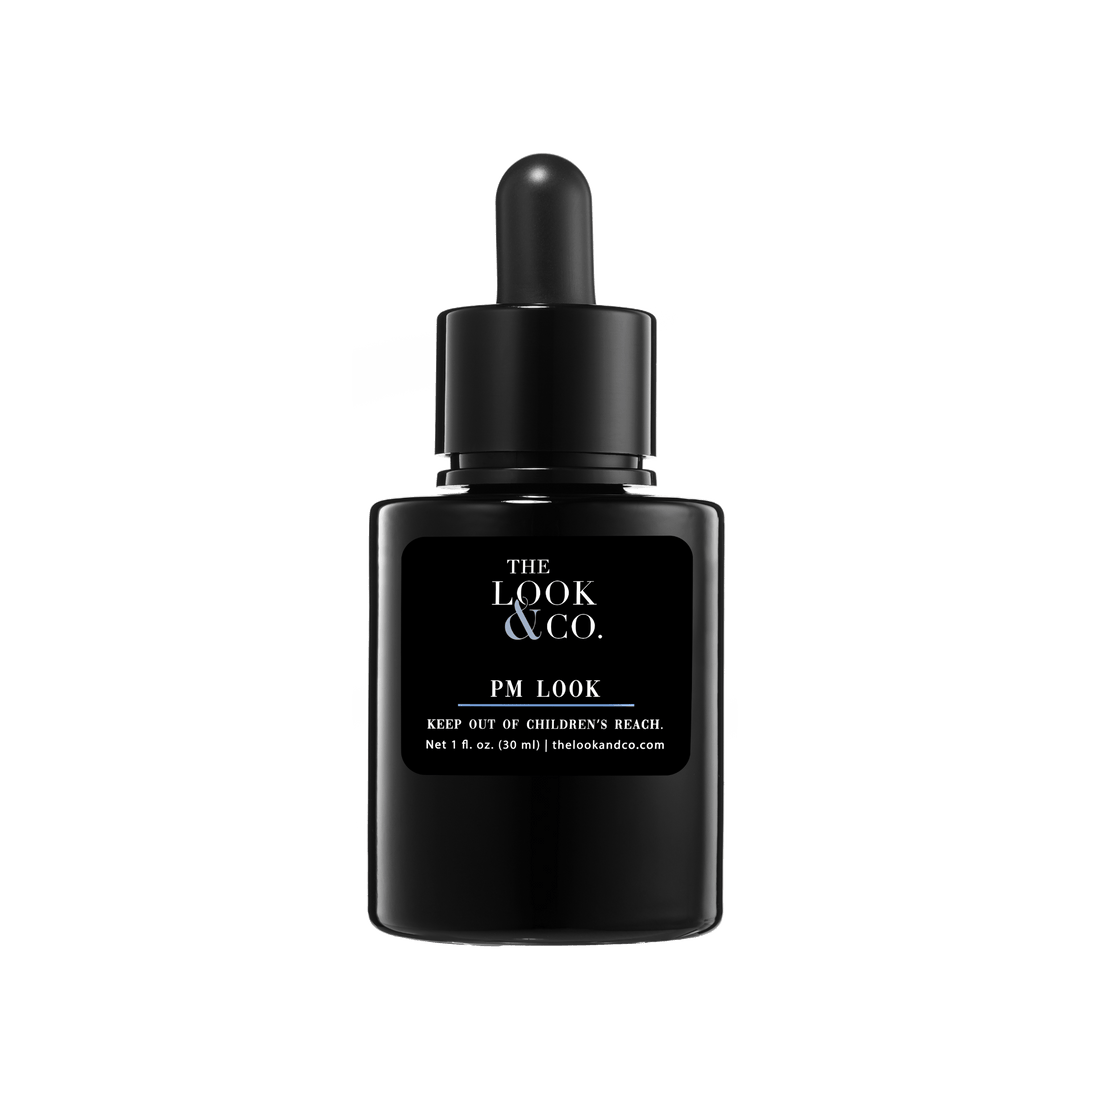 The PM Look - 2.5% Retinol - The Look and Co